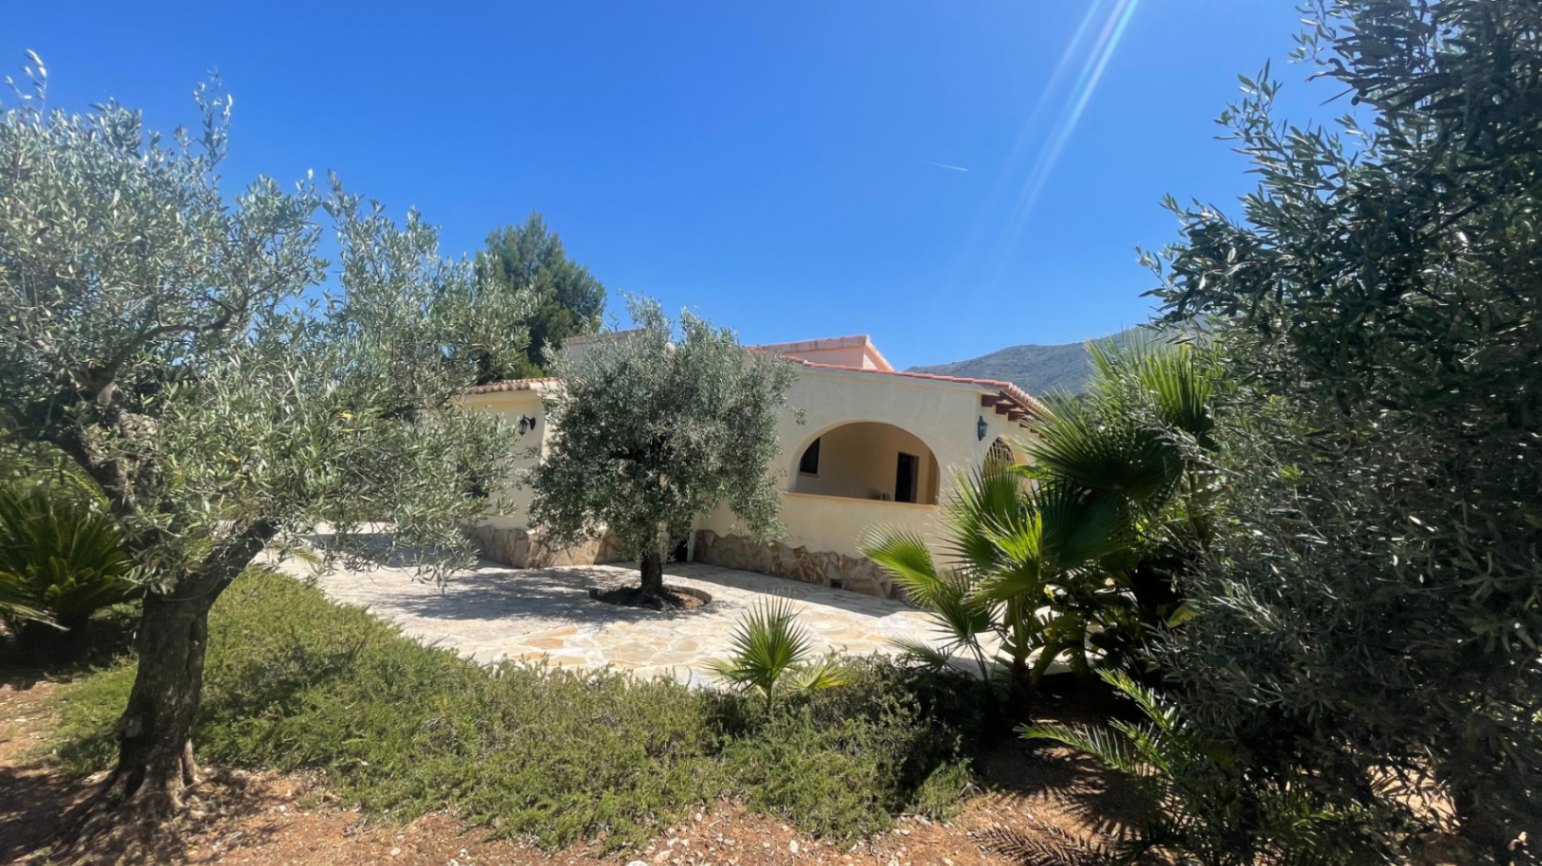 For sale in Parcent: Villa on a flat plot of 1346m2